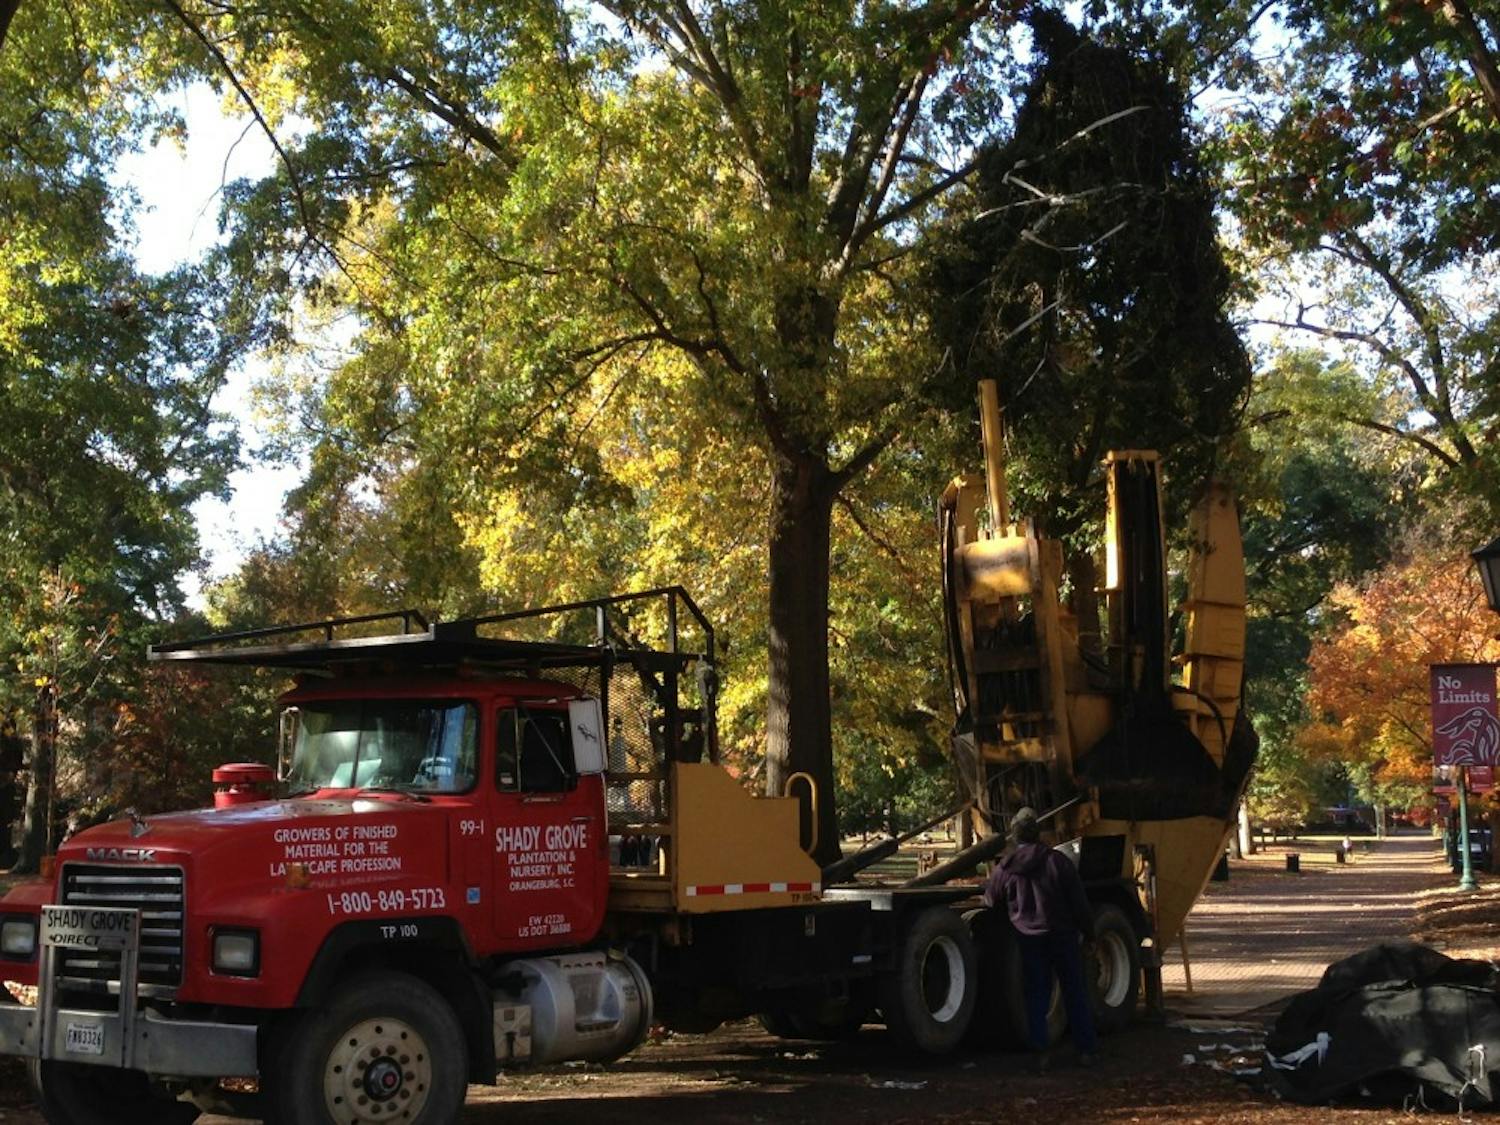 	Crews plant a 20-foot oak tree on the Horseshoe where three paths intersect near the Osborne Administration Building.